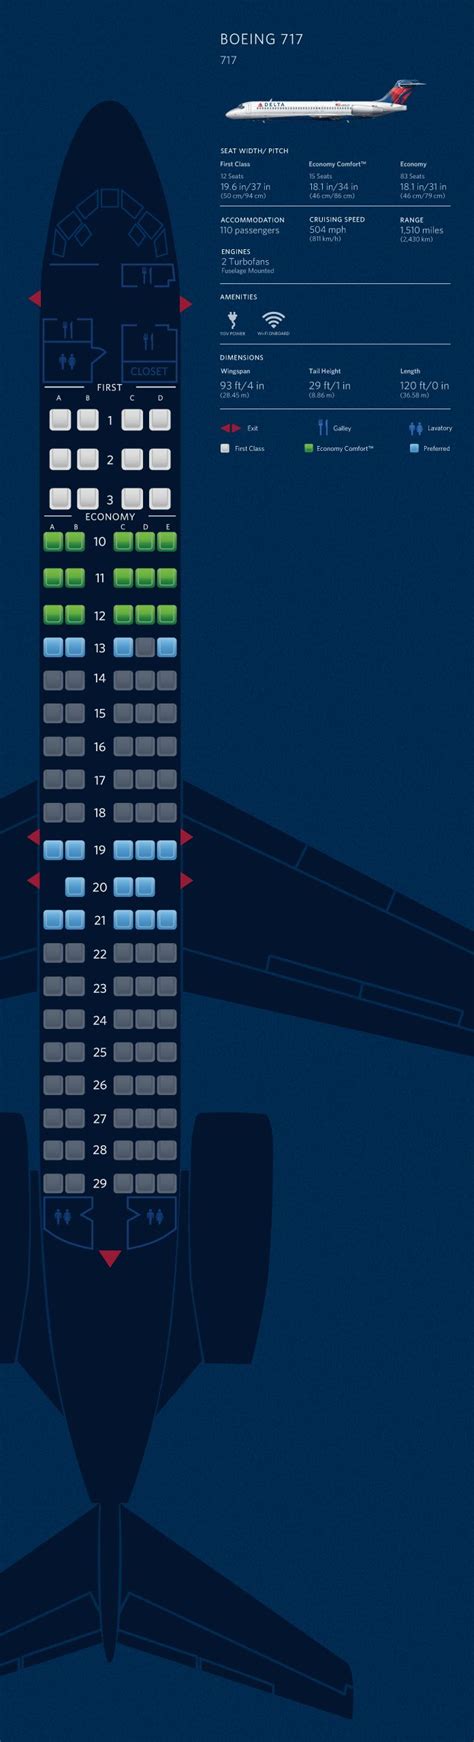 Delta Boeing 717 Seat Map Updated Find The Best Seat Seatmaps Lupon